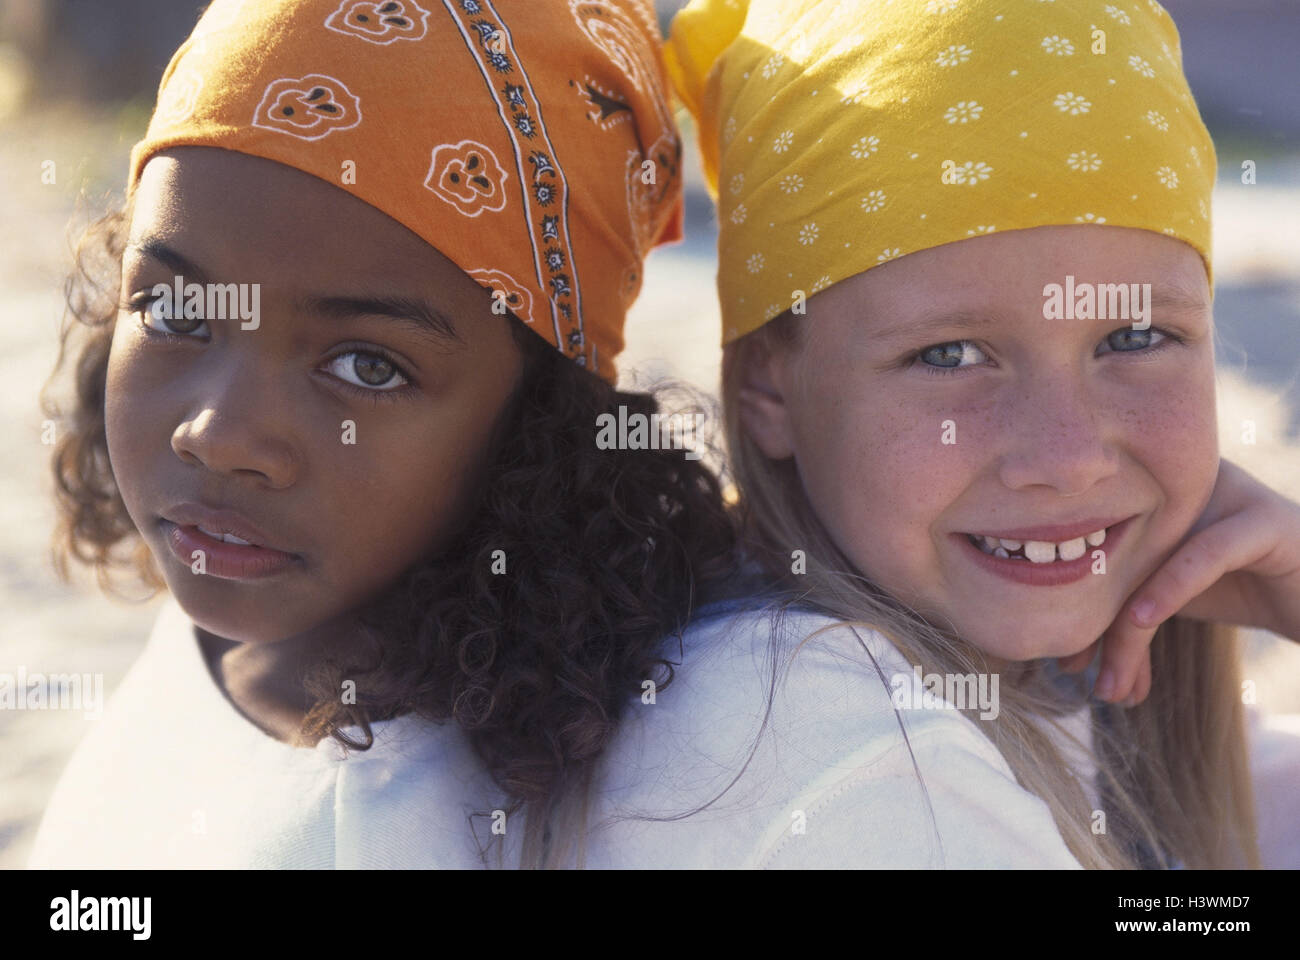 Girls, different colour of skin, headscarfs, portrait, friends, friendship, friends, nationality, differently, non-whites, whiteness, children, childhood, headgears, back on back, fun, happy, together, cohesion, view camera, outside Stock Photo